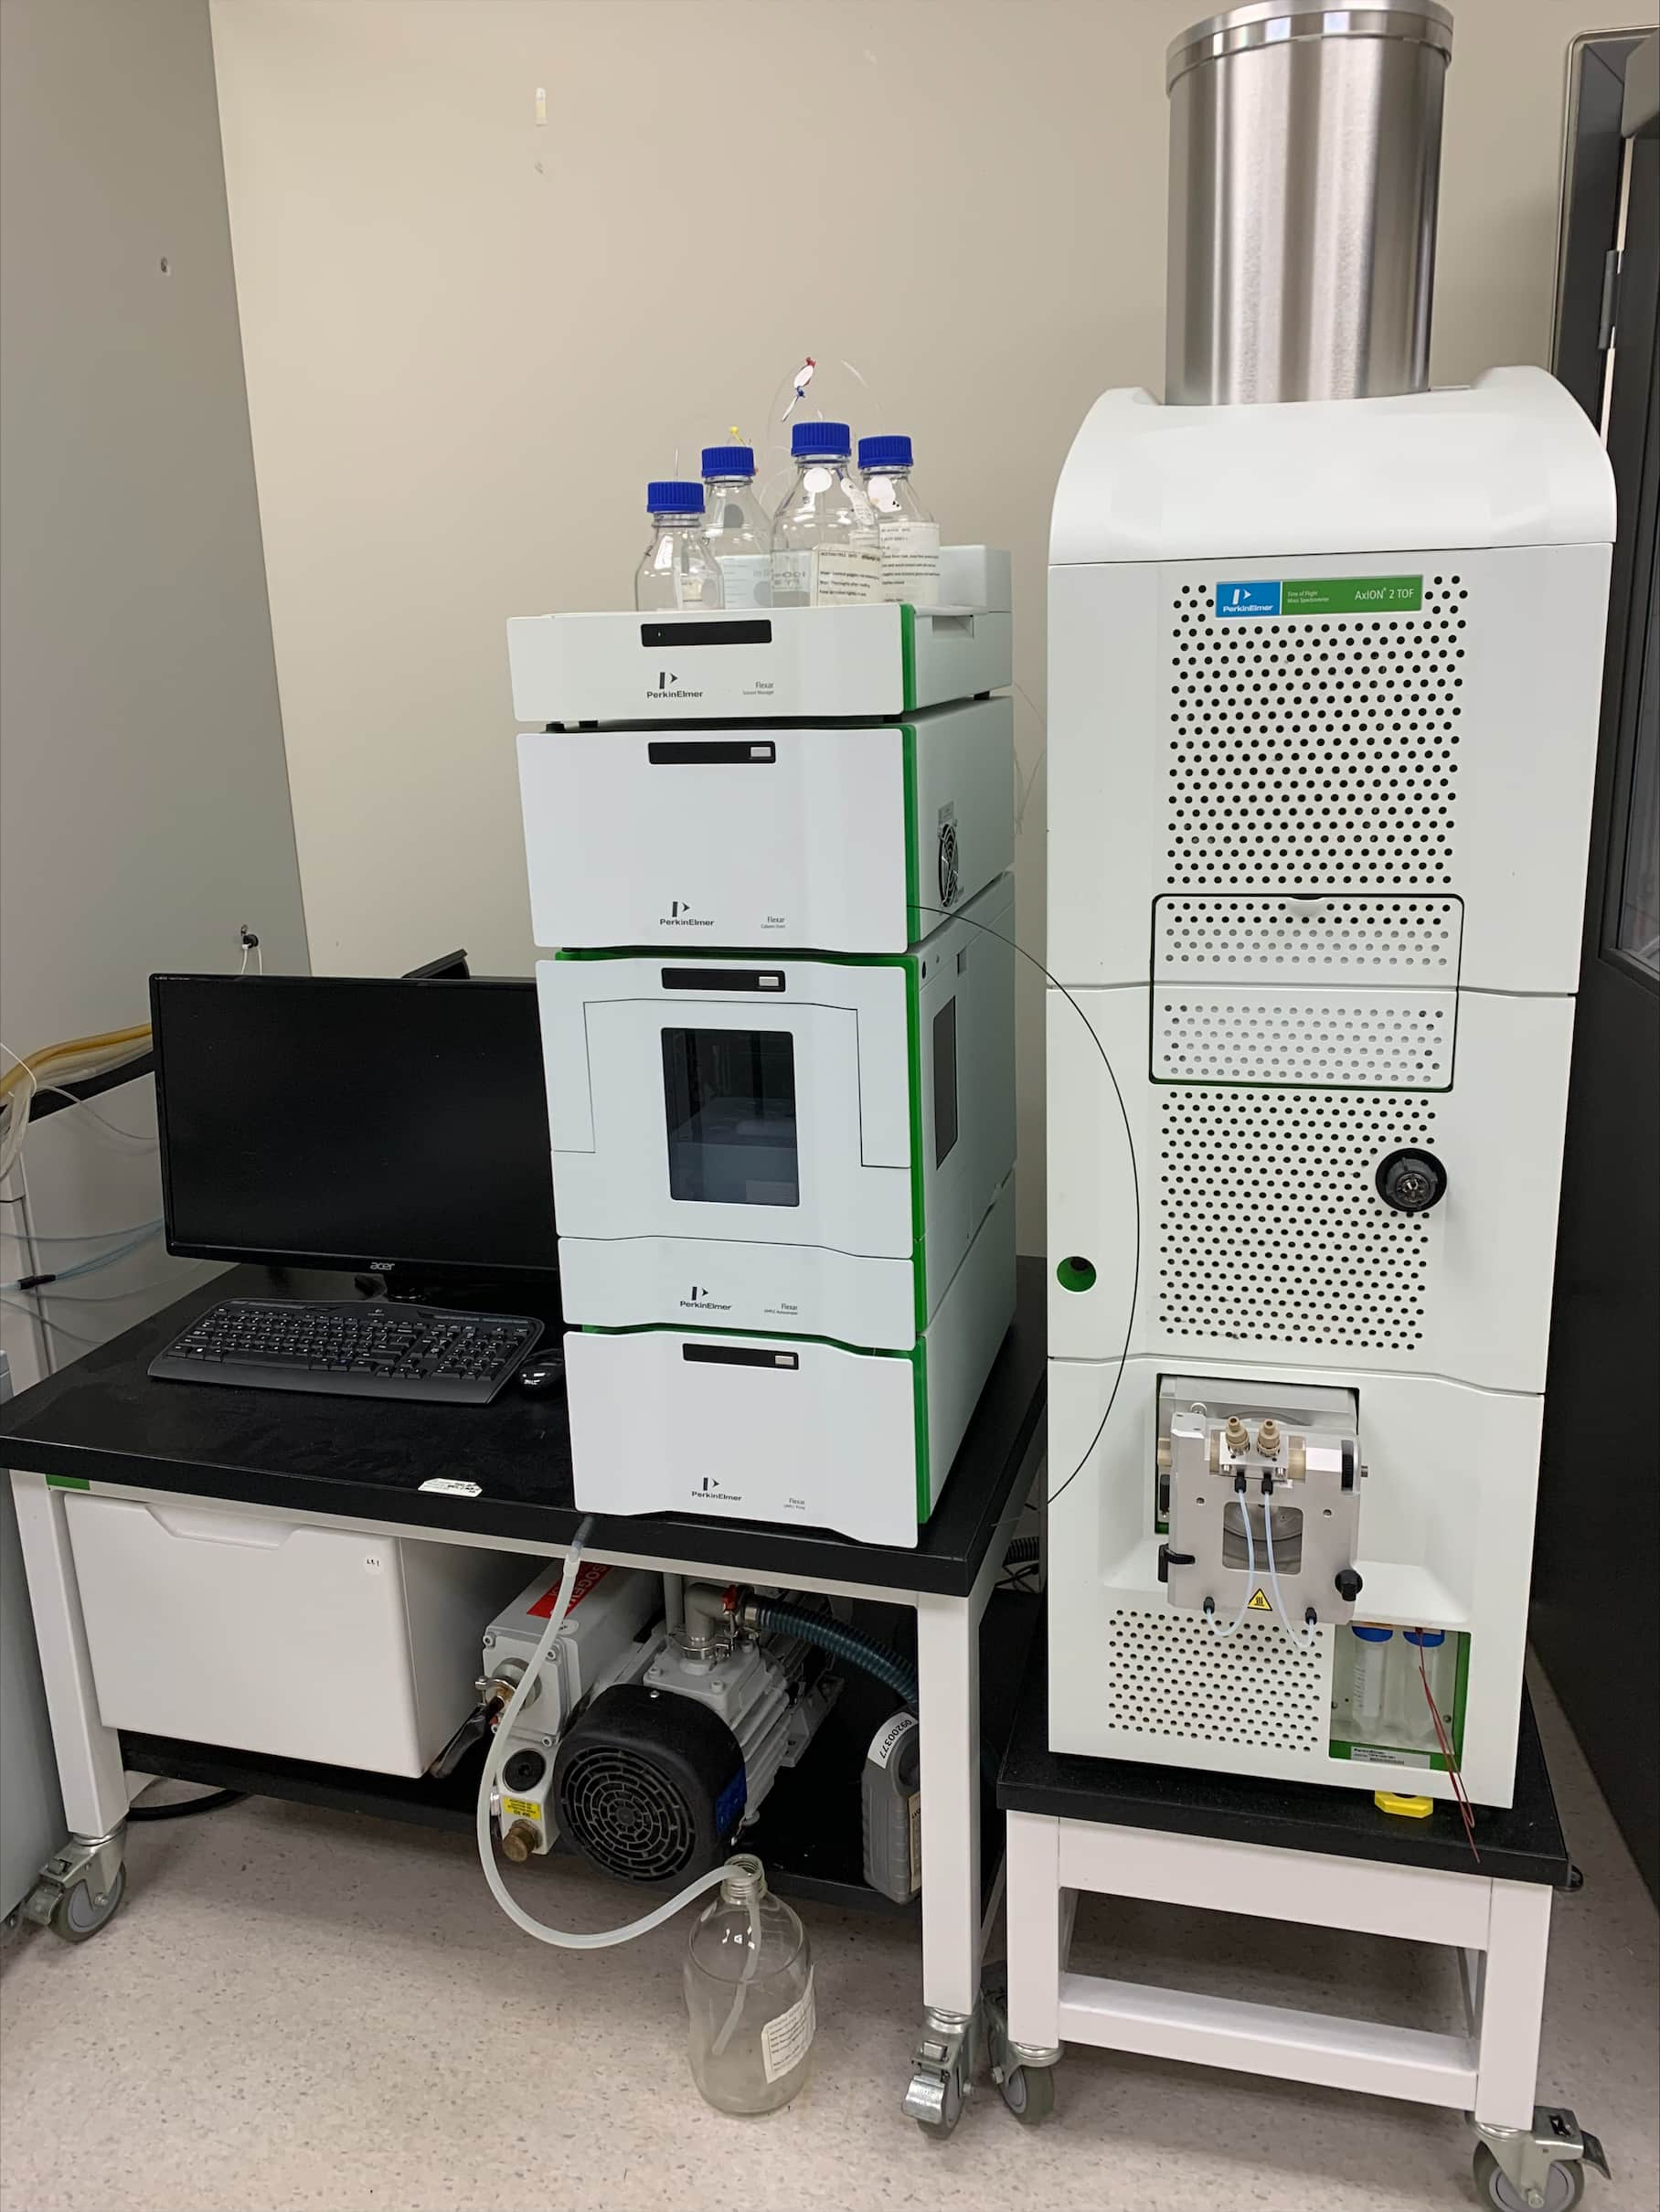 Perkin Elmer uHPLC System  - complete with Flexar Solvent Manager, Autosampler, Peltier Switching module, Dual Binary Pump, and Axion 2 TOF MS detector